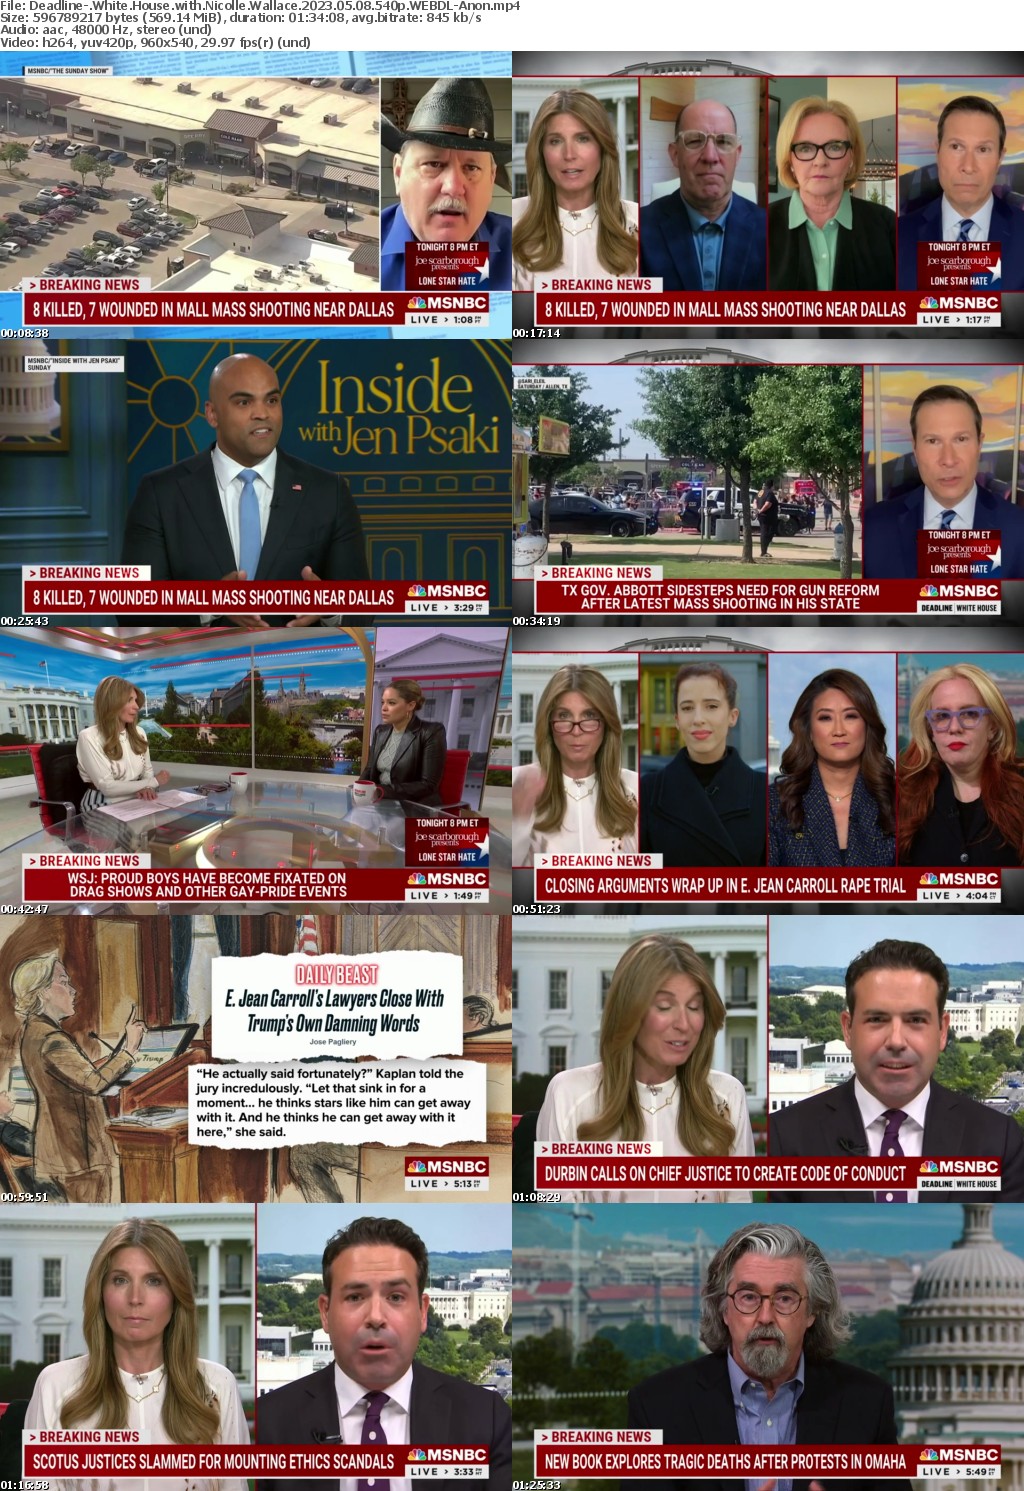 Deadline- White House with Nicolle Wallace 2023 05 08 540p WEBDL-Anon